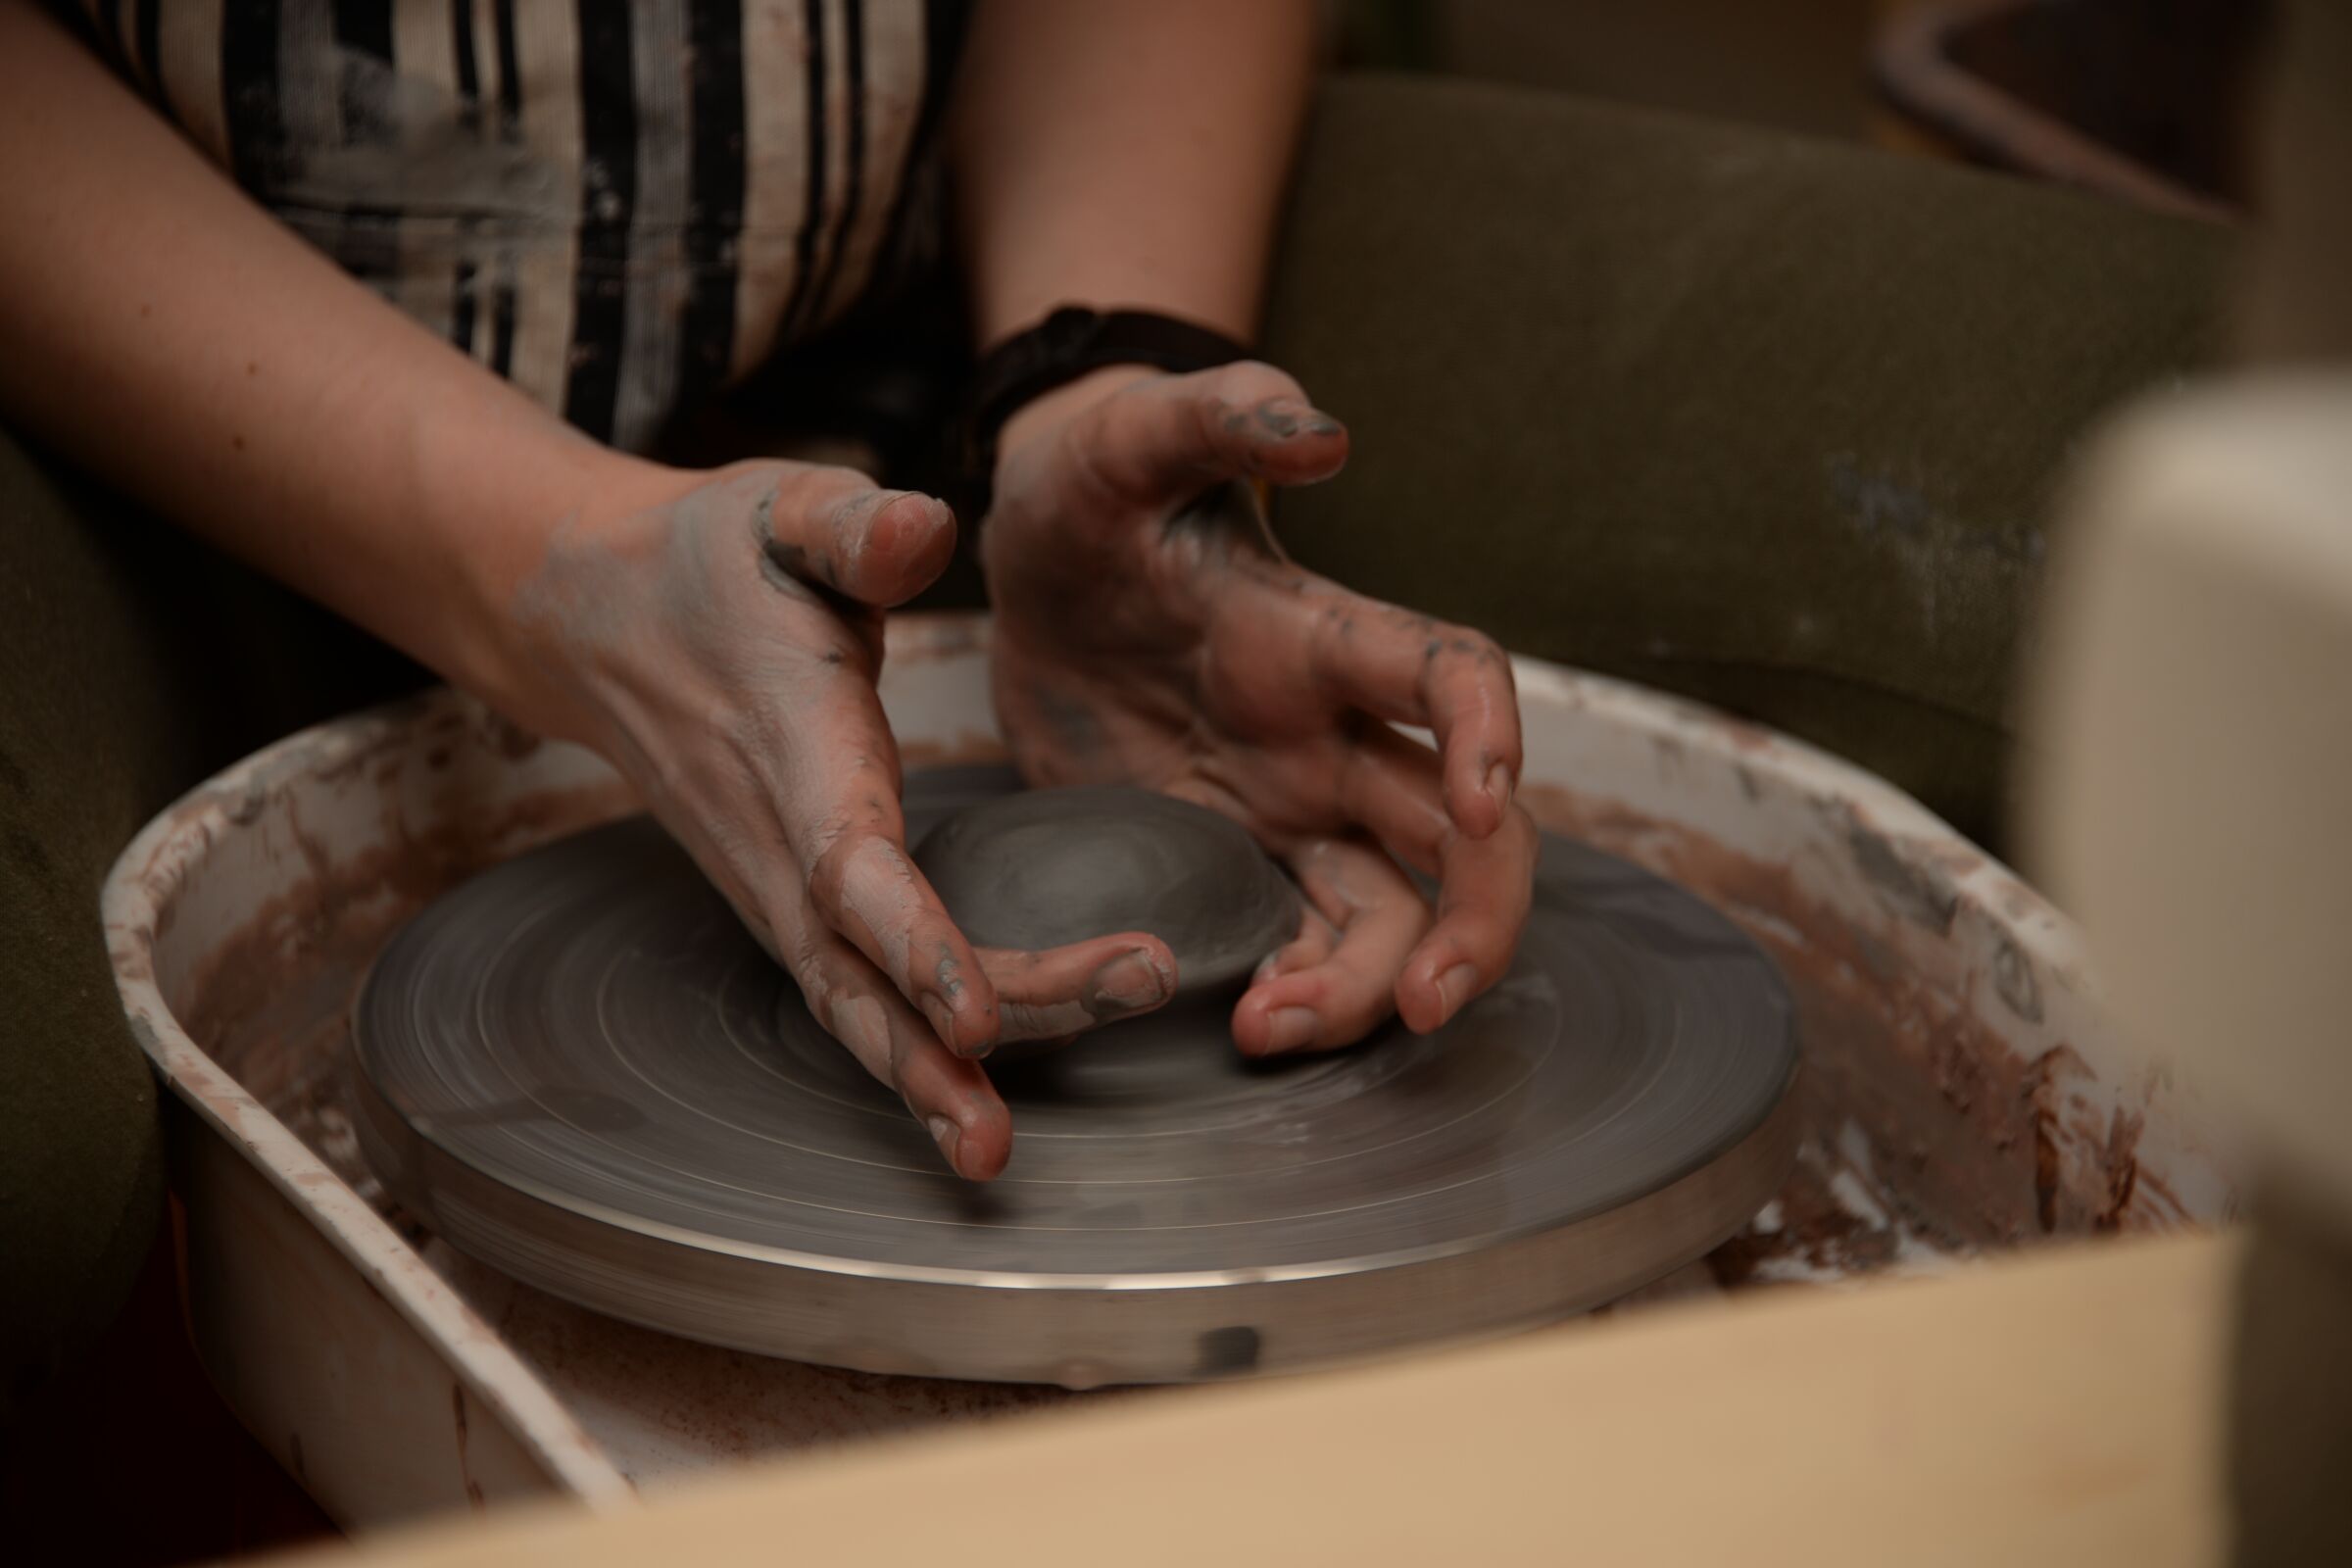 Staff writer Sara Butler attempts making a ceramic on pottery wheel